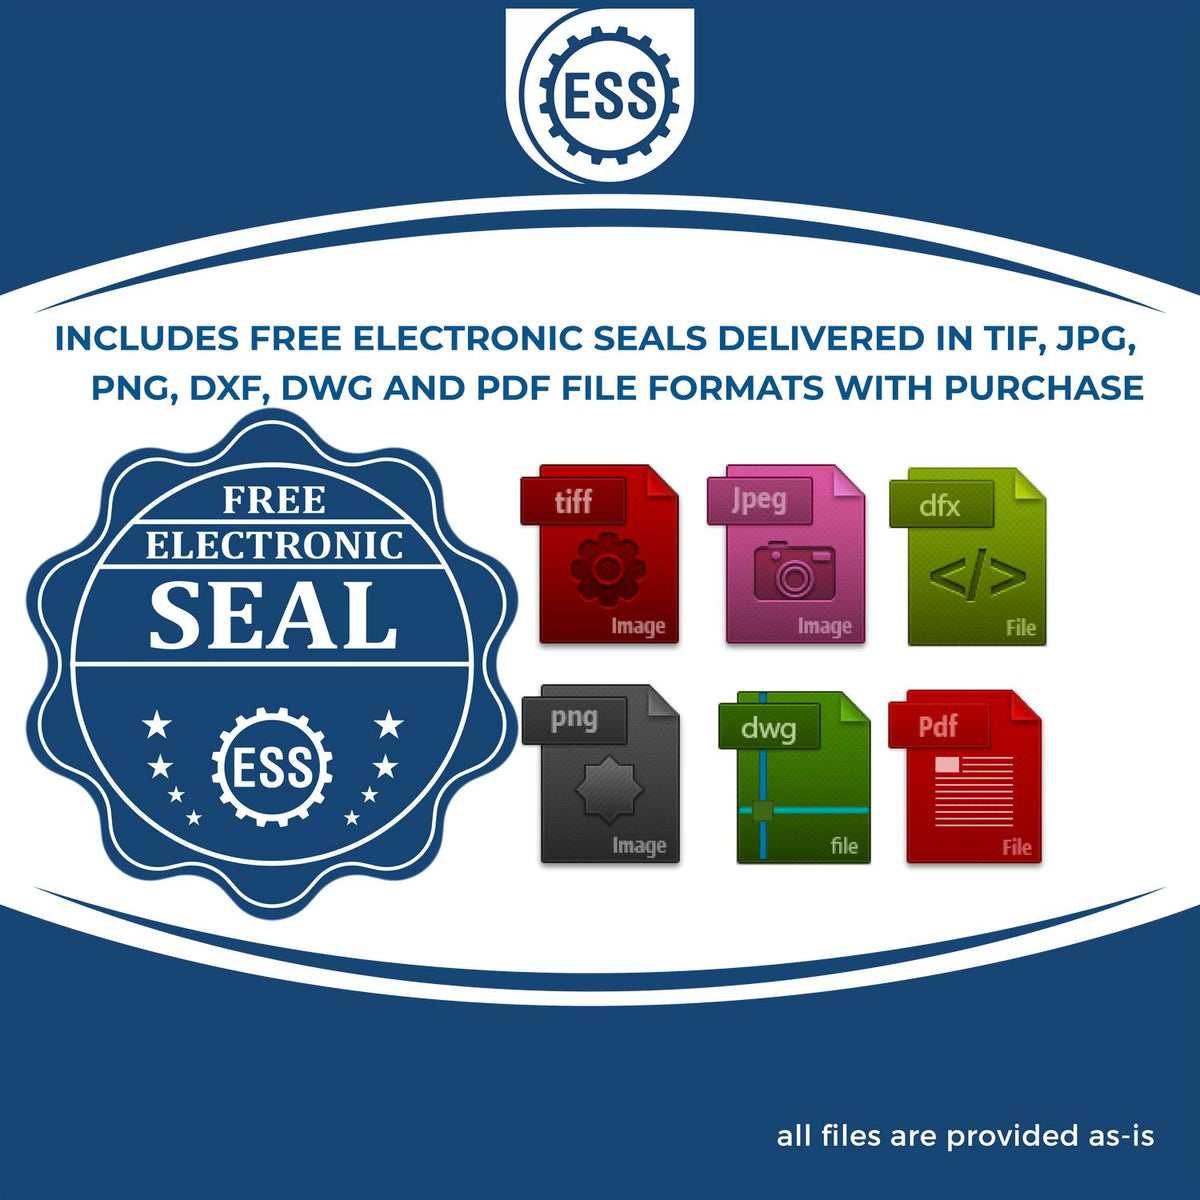 An infographic for the free electronic seal for the Long Reach Florida Land Surveyor Seal illustrating the different file type icons such as DXF, DWG, TIF, JPG and PNG.